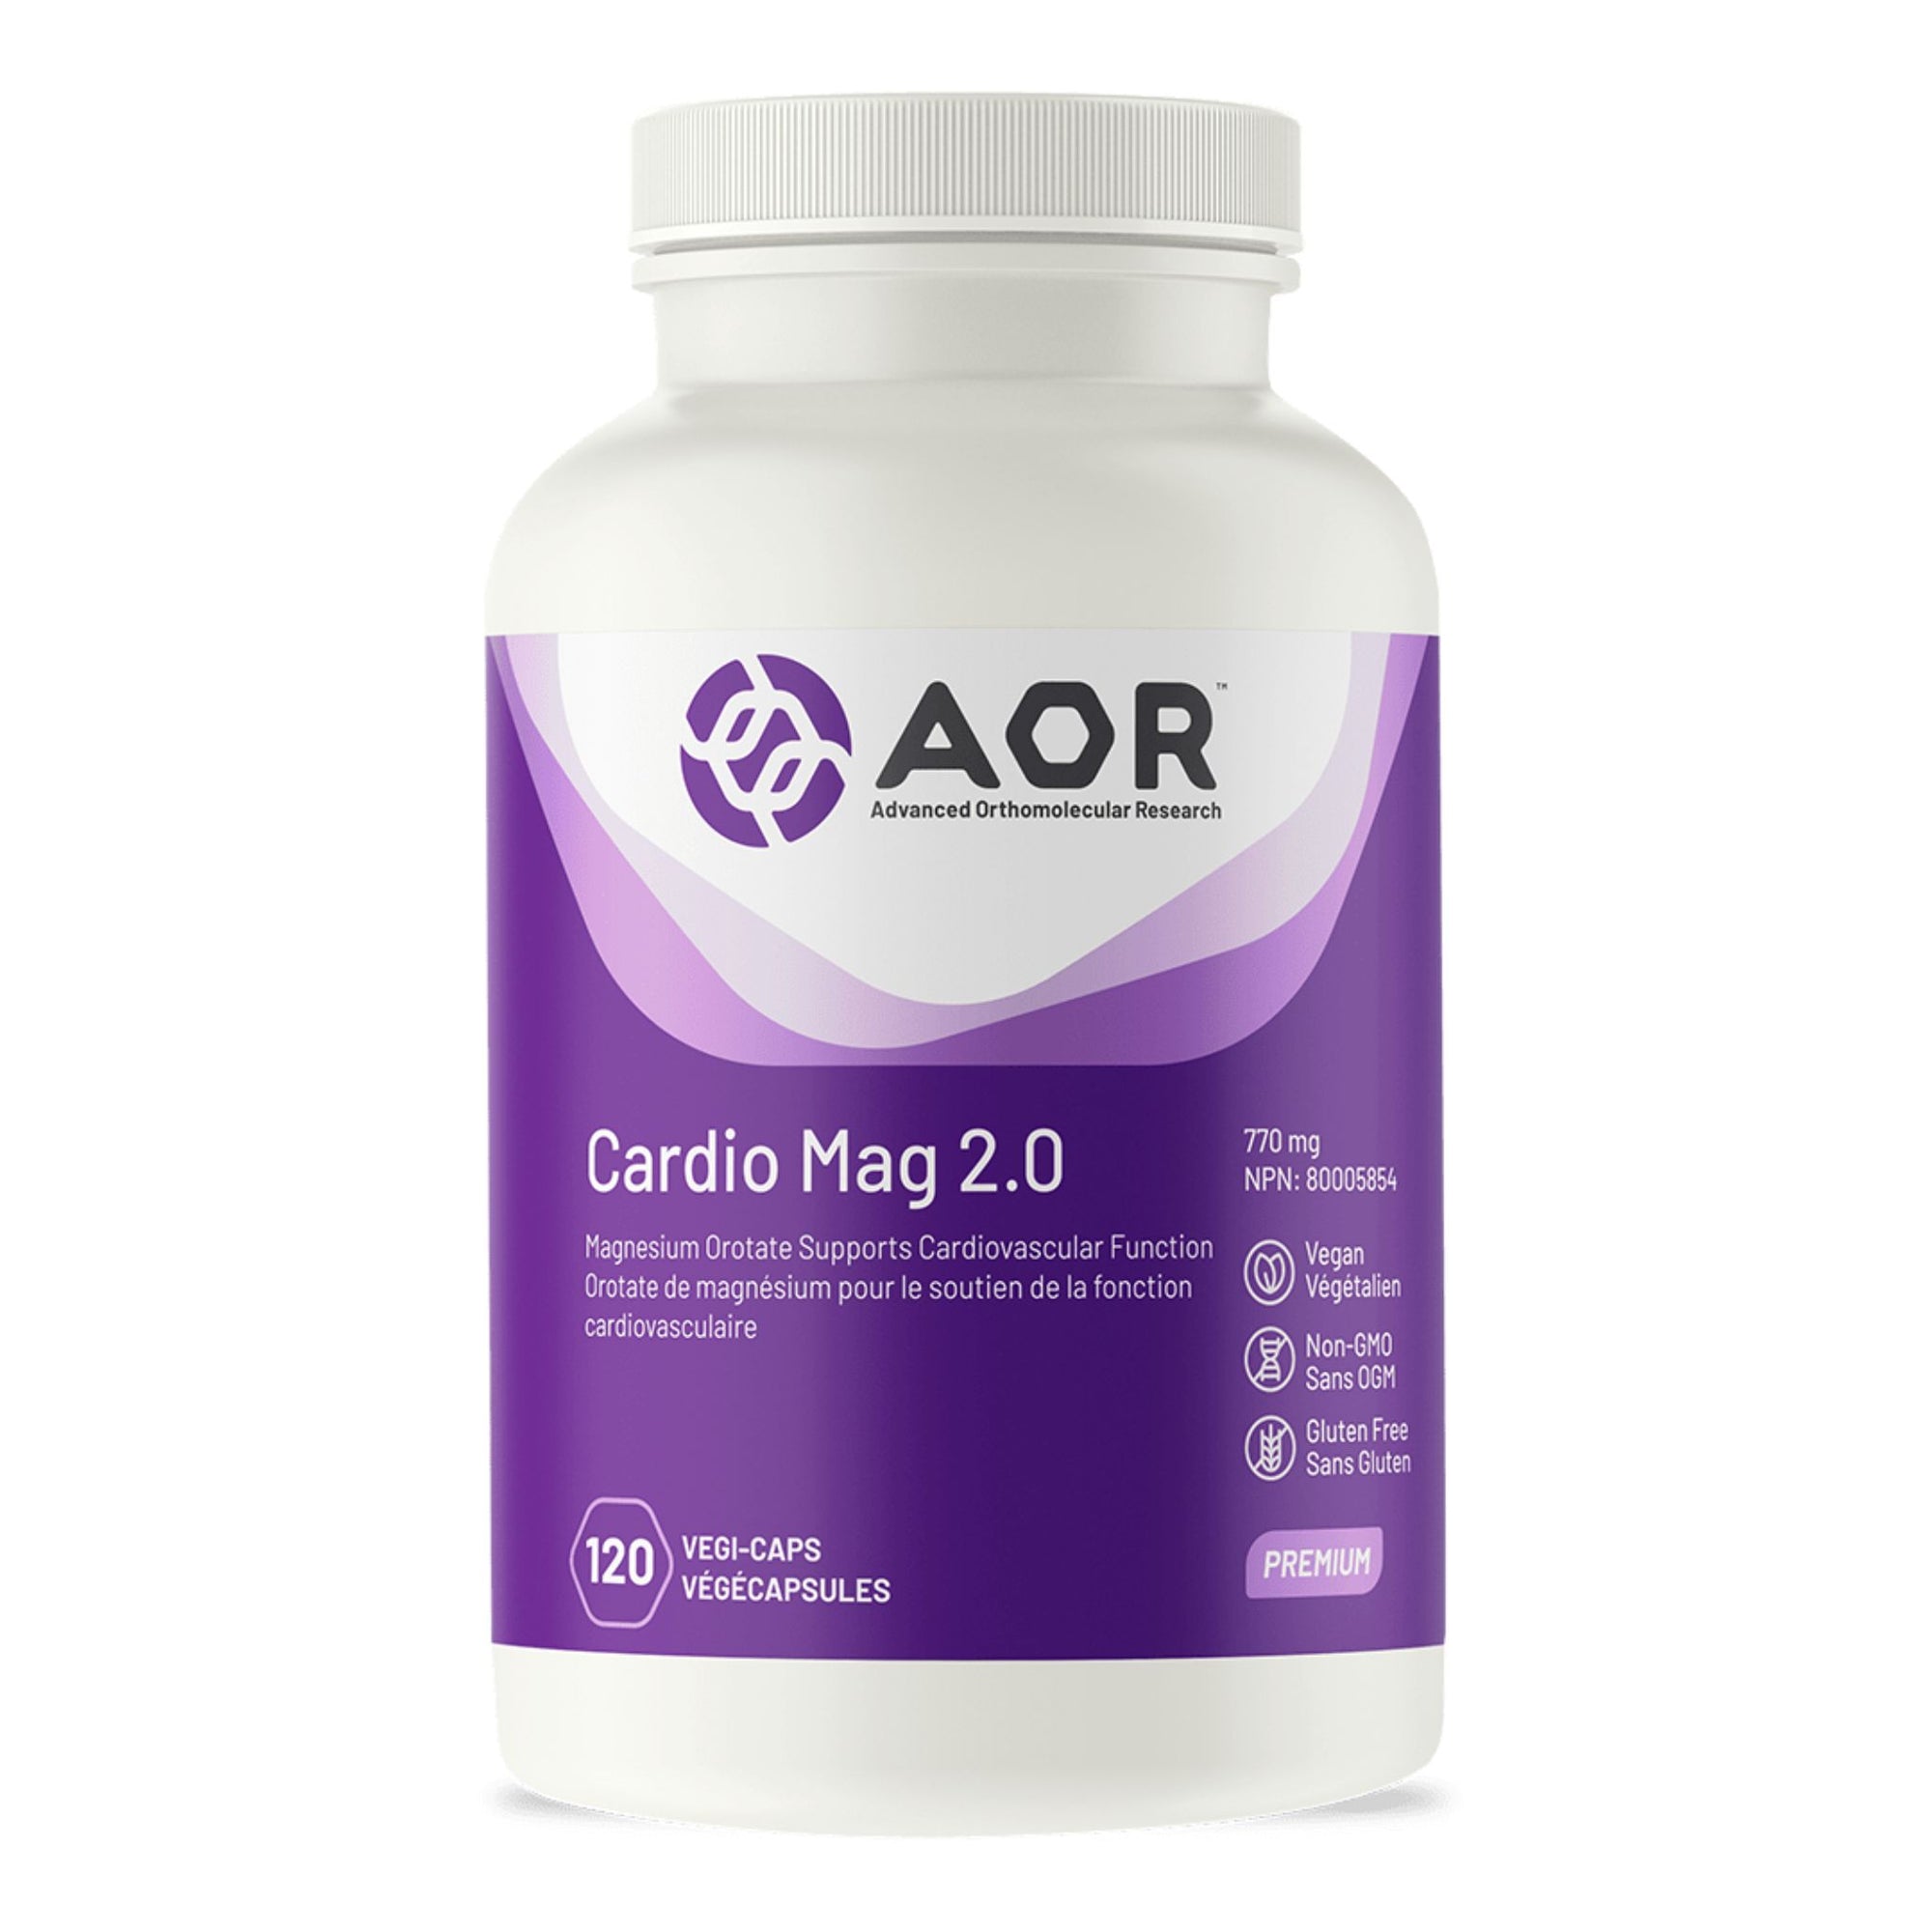 Bottle of AOR Cardio Mag 2.0 120 vegetable capsules - Magnesium orotate supports cardiovascular function - 770 mg - vegan, non-GMO, Gluten free